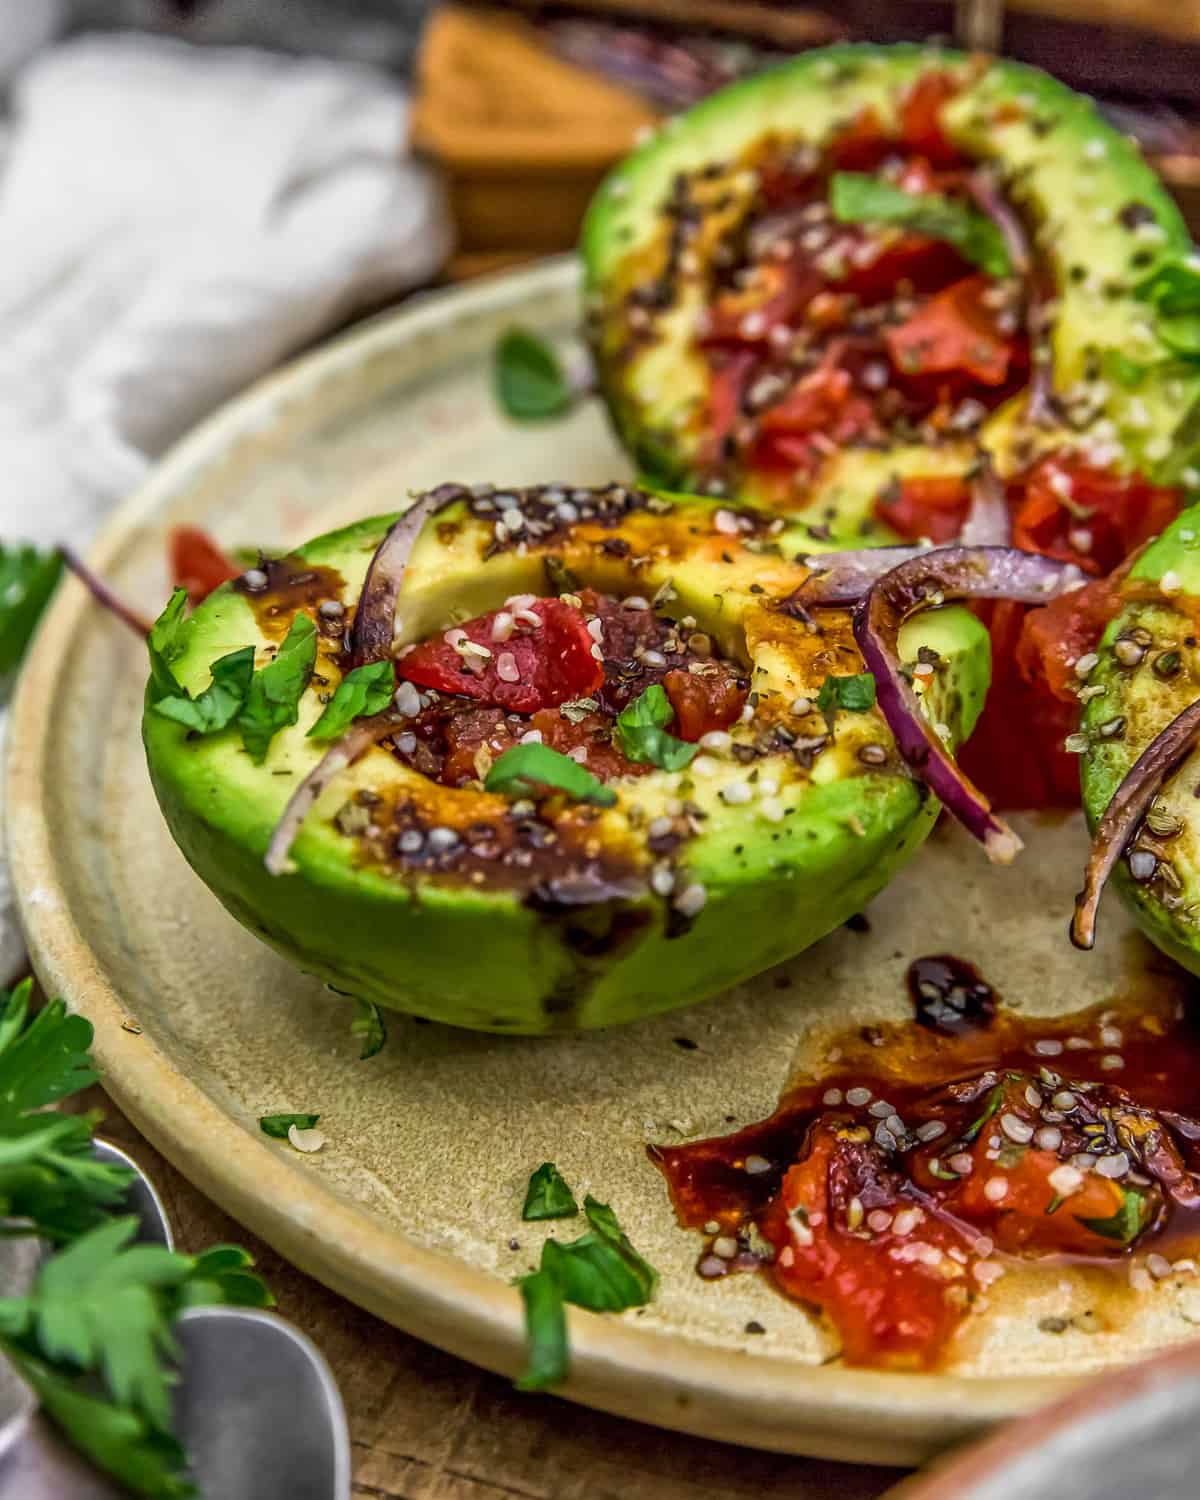 Plated Roasted Tomato Stuffed Avocados with Balsamic Reduction